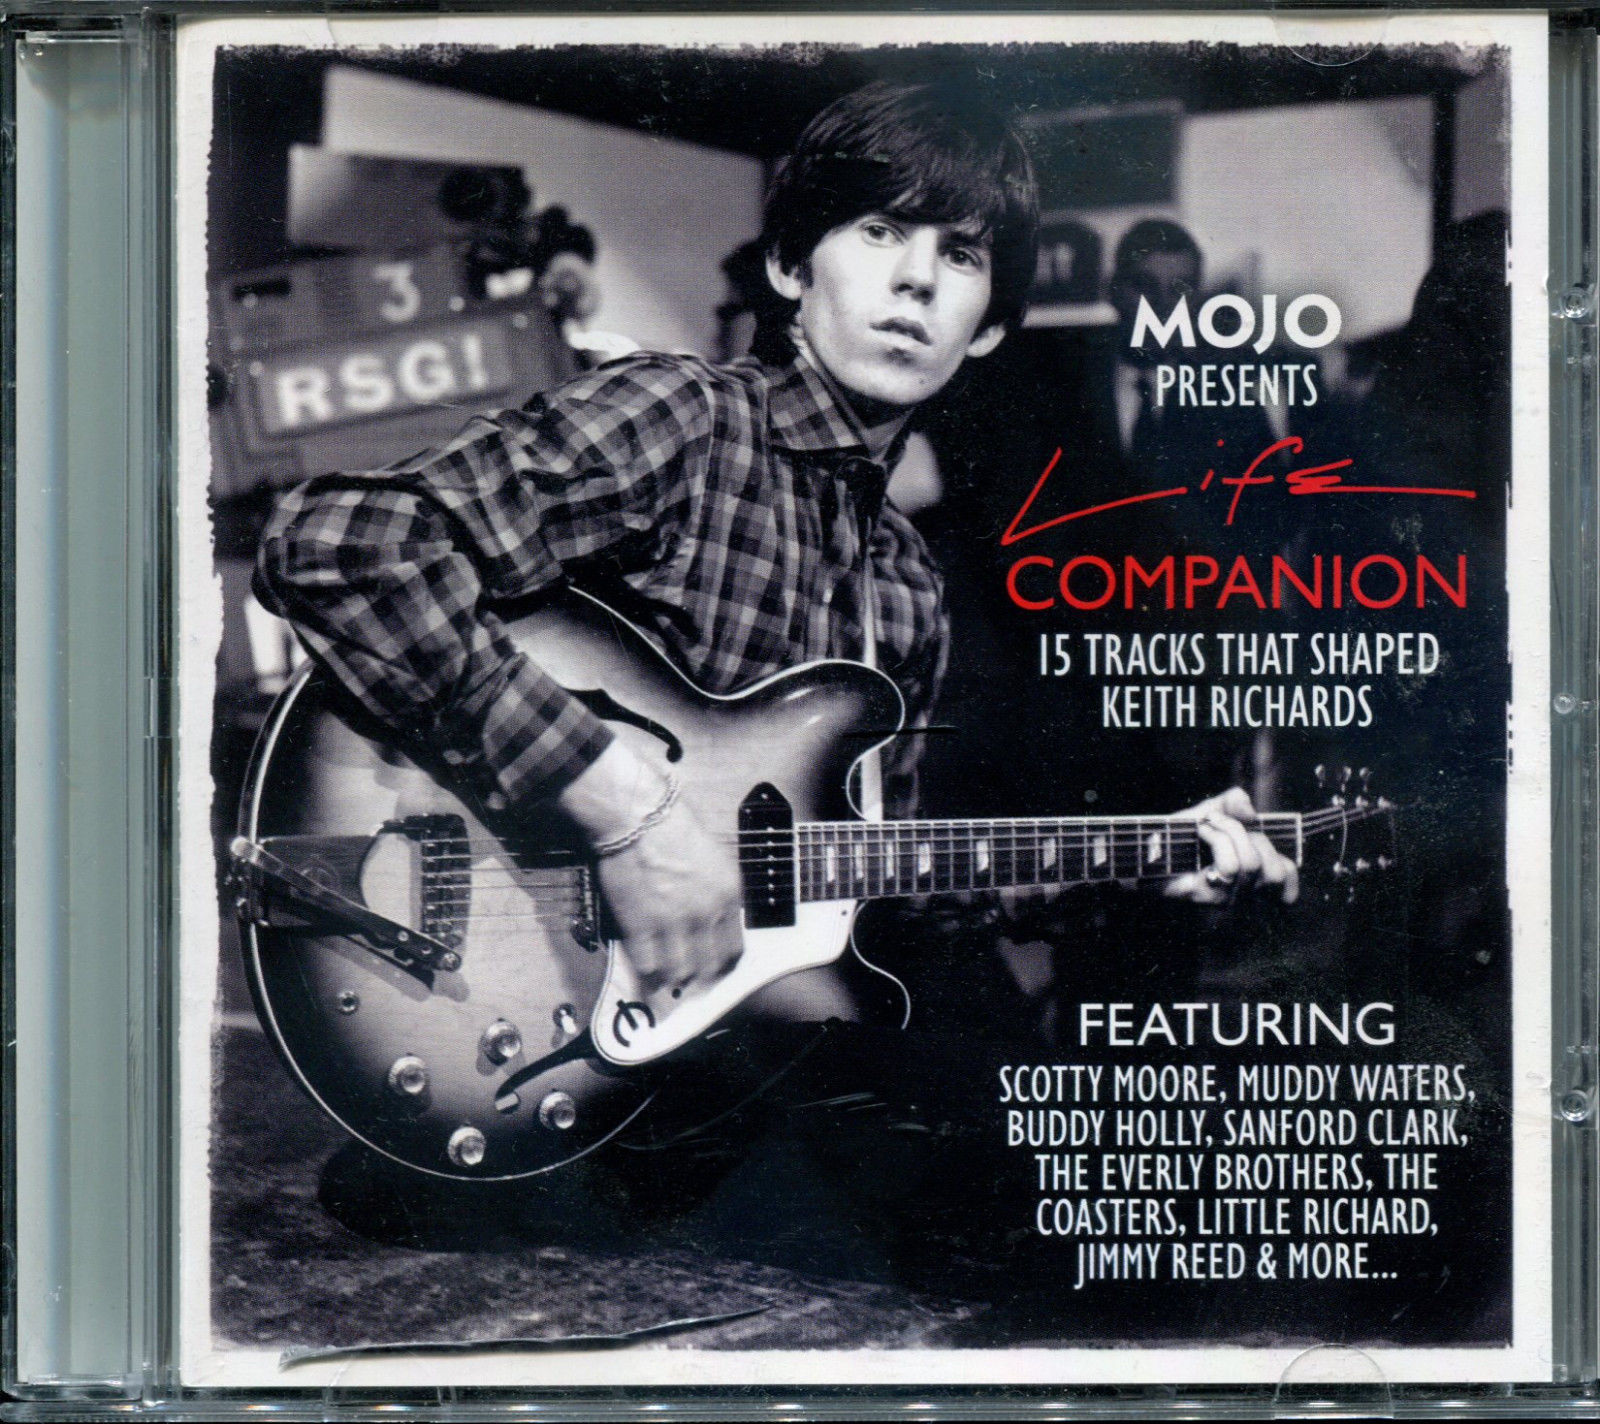 V/A incl. Muddy Waters, Chuck Berry, Little Richard, Bo Diddley, etc: Life Companion, 15 tracks that shaped Keith Richards, CD, UK, 2015 - £ 6.02